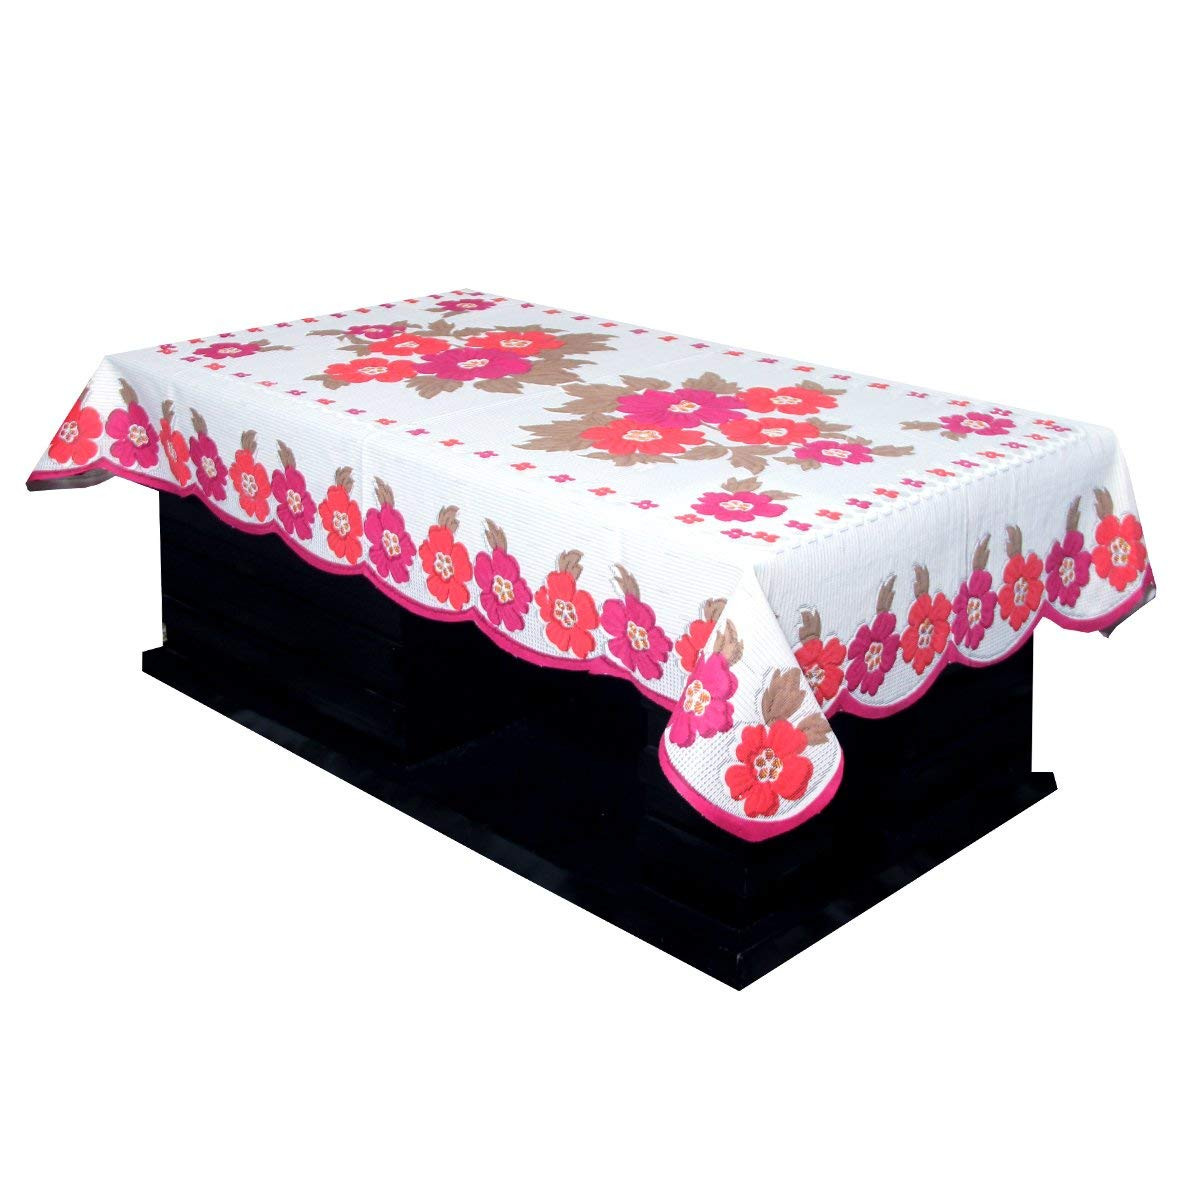 Kuber Industries Flower Design Cotton 5 Seater Sofa Cover With 6 Pieces Arms cover And 1 Center Table Cover Use Both Side, Living Room, Drawing Room, Bedroom, Guest Room (Set Of17, Pink)-KUBMRT12019